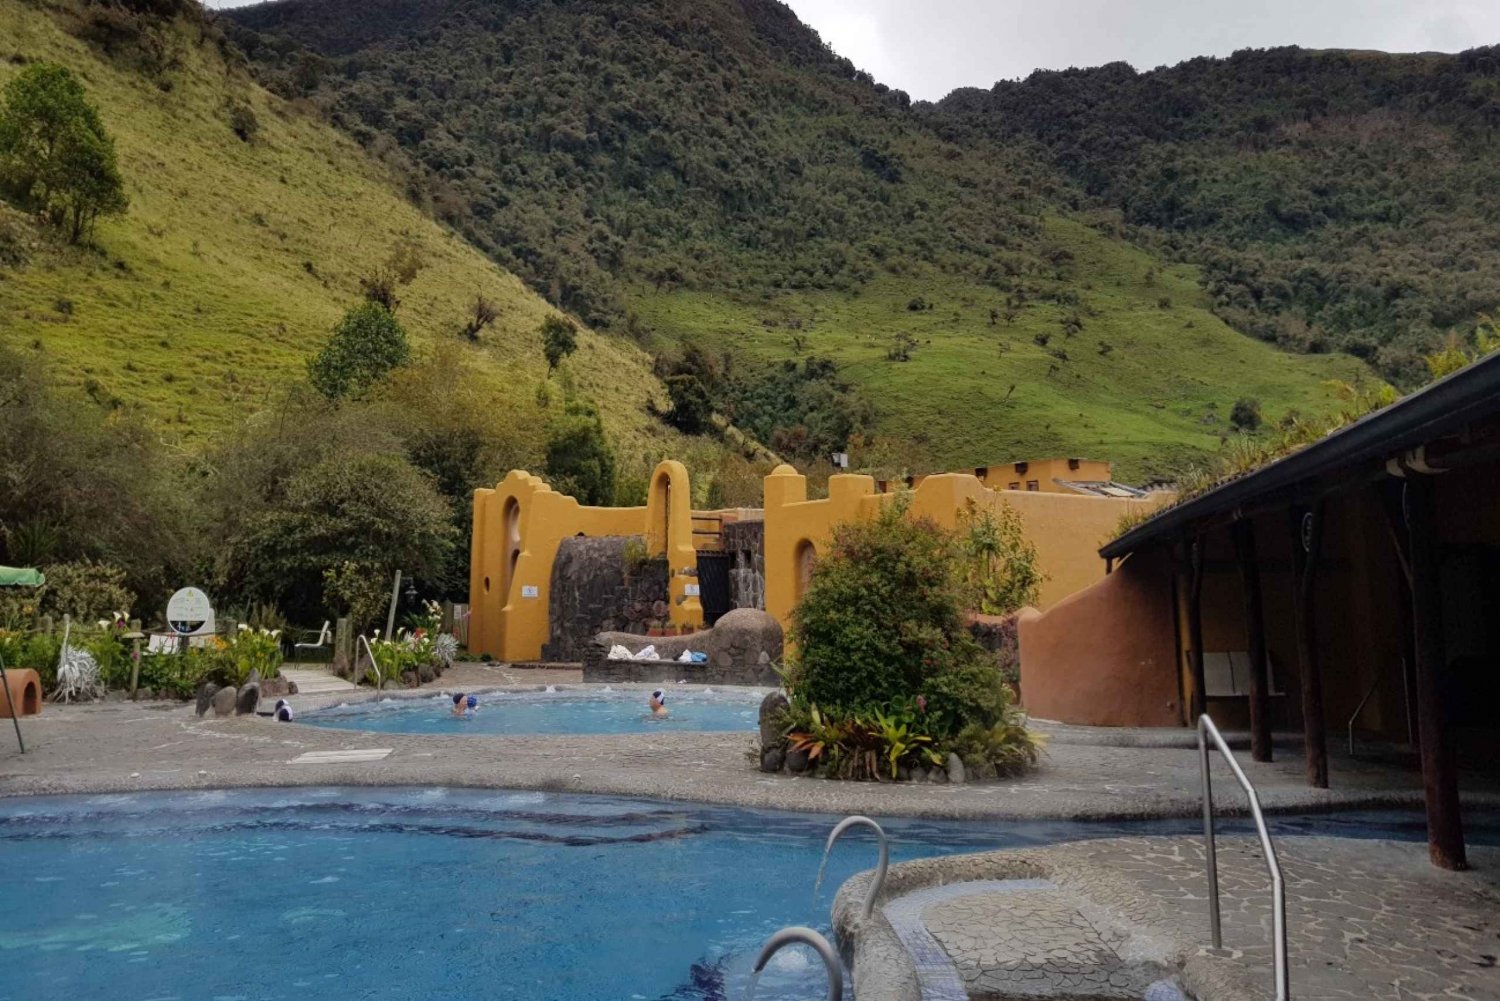 Cotopaxi Volcano and Papallacta Hot Springs - In a One Day